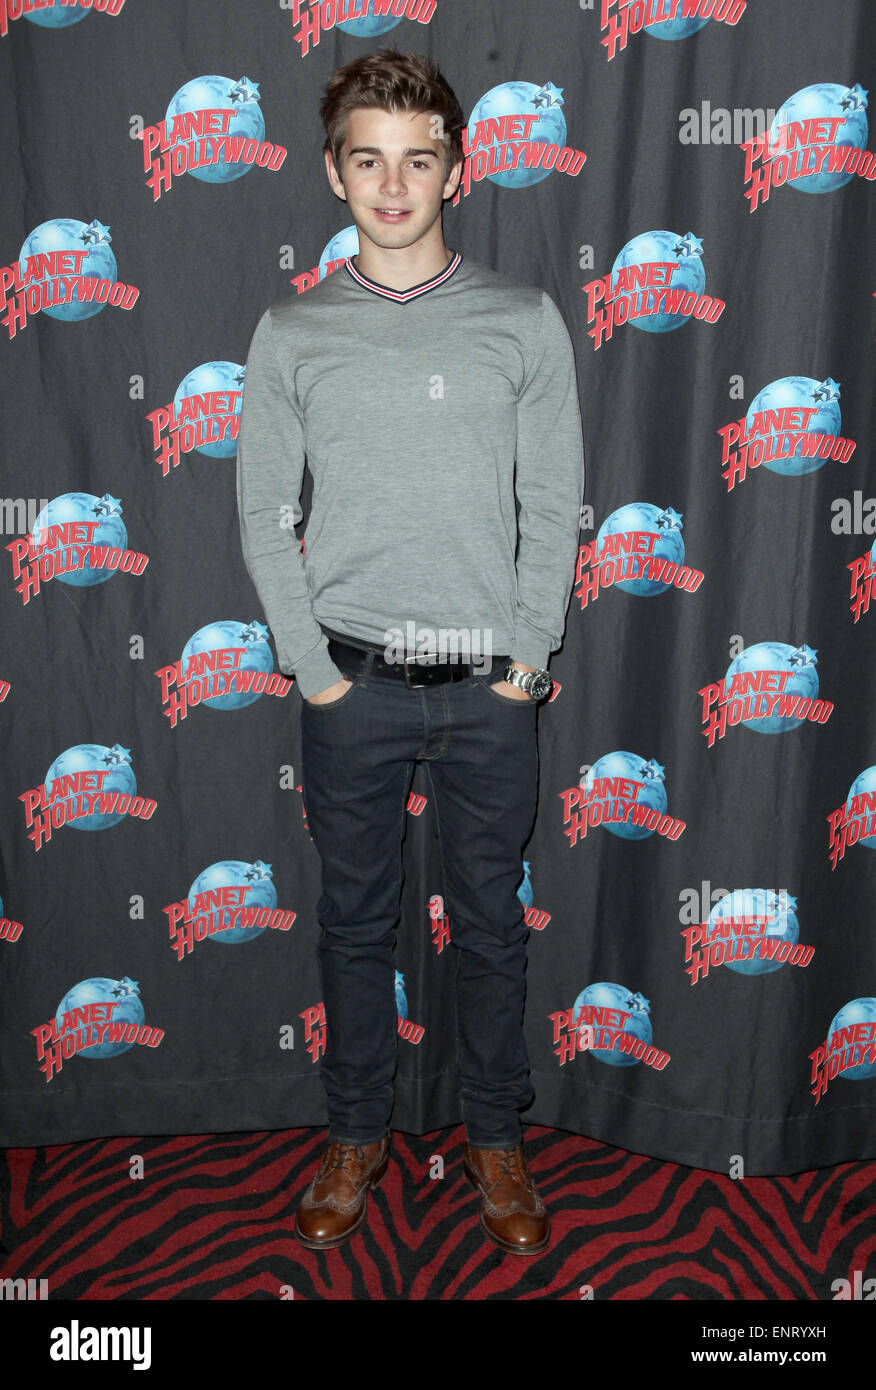 Planet Hollywood presents Jack Griffo from Nickelodeon's 'The Thundermans'  Featuring: Jack Griffo Where: New York, United States When: 05 Nov 2014  Credit: PNP/WENN.com Stock Photo - Alamy